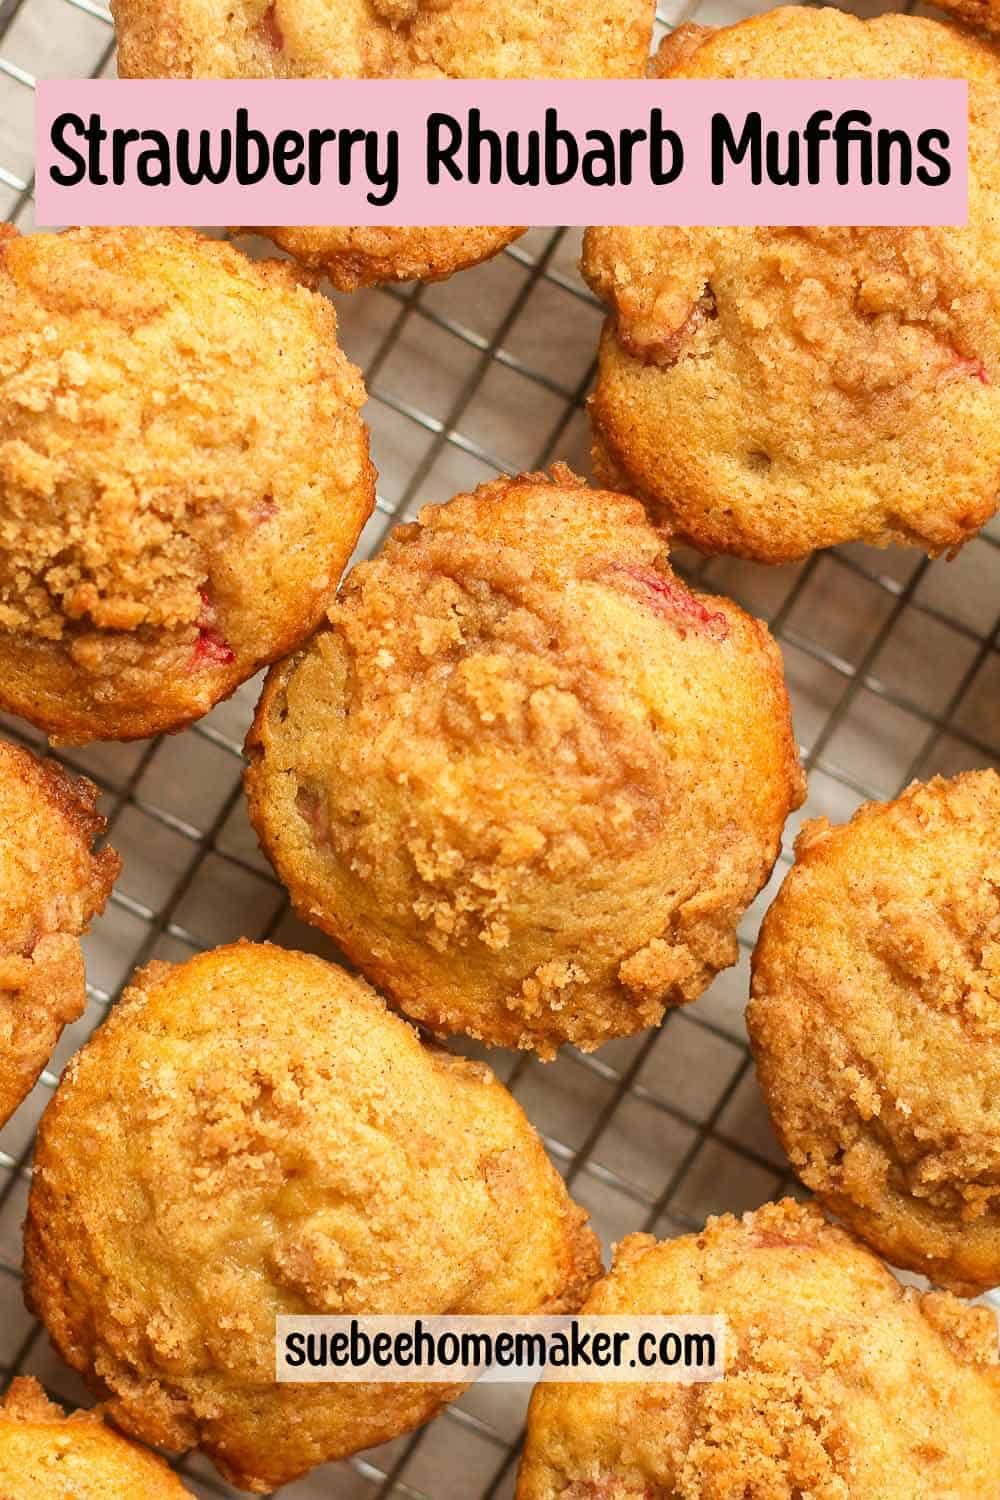 Closeup on some strawberry rhubarb muffins on a wire rack.